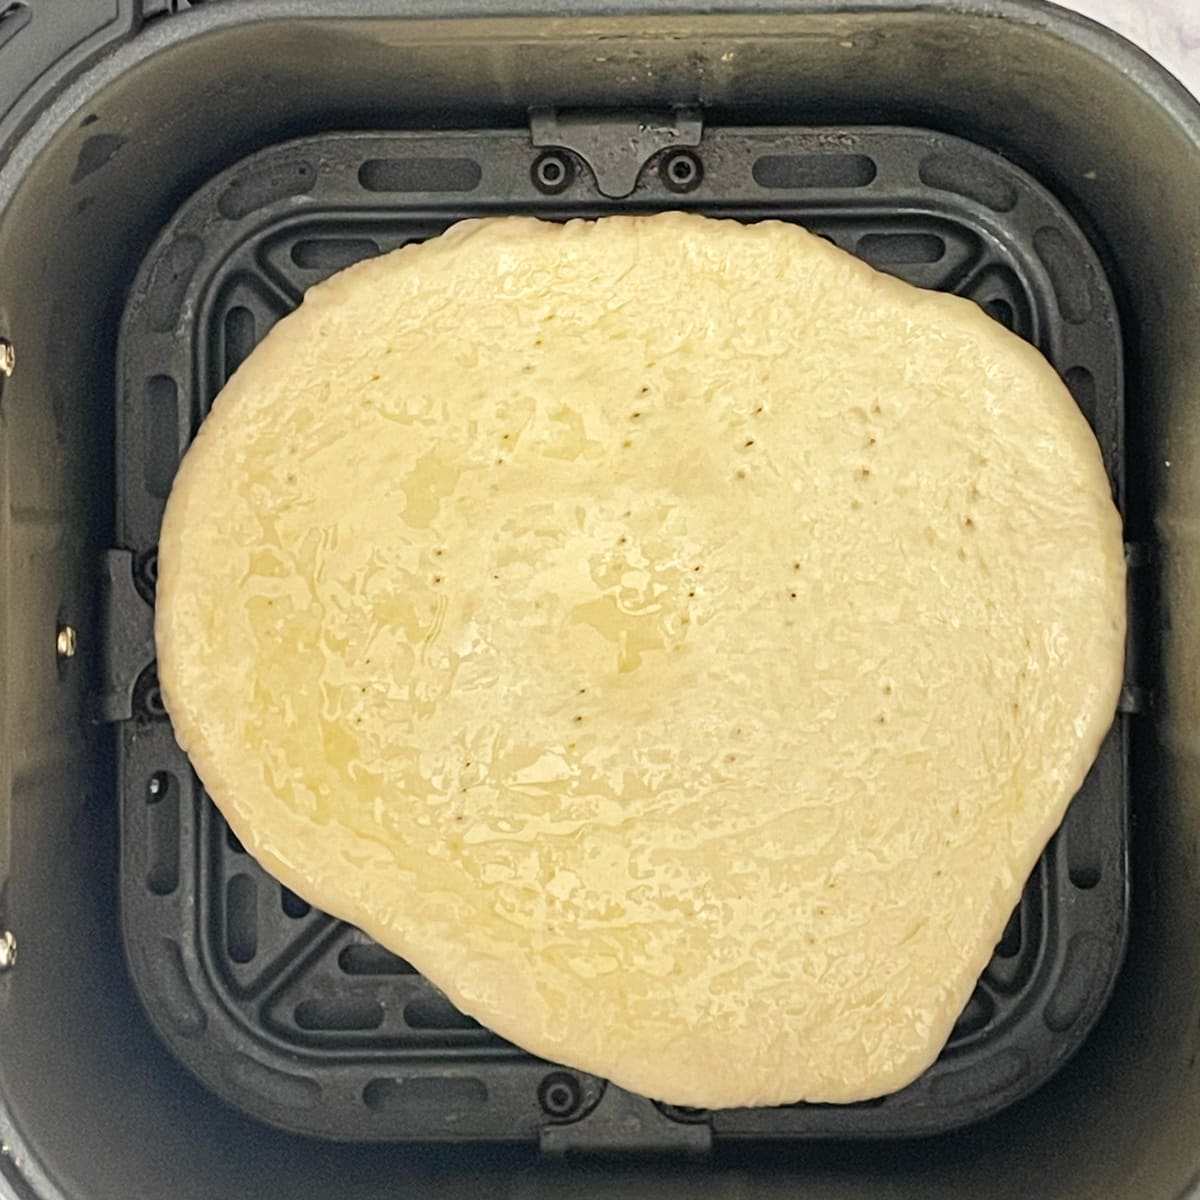 Rolled pizza base in air fryer basket.